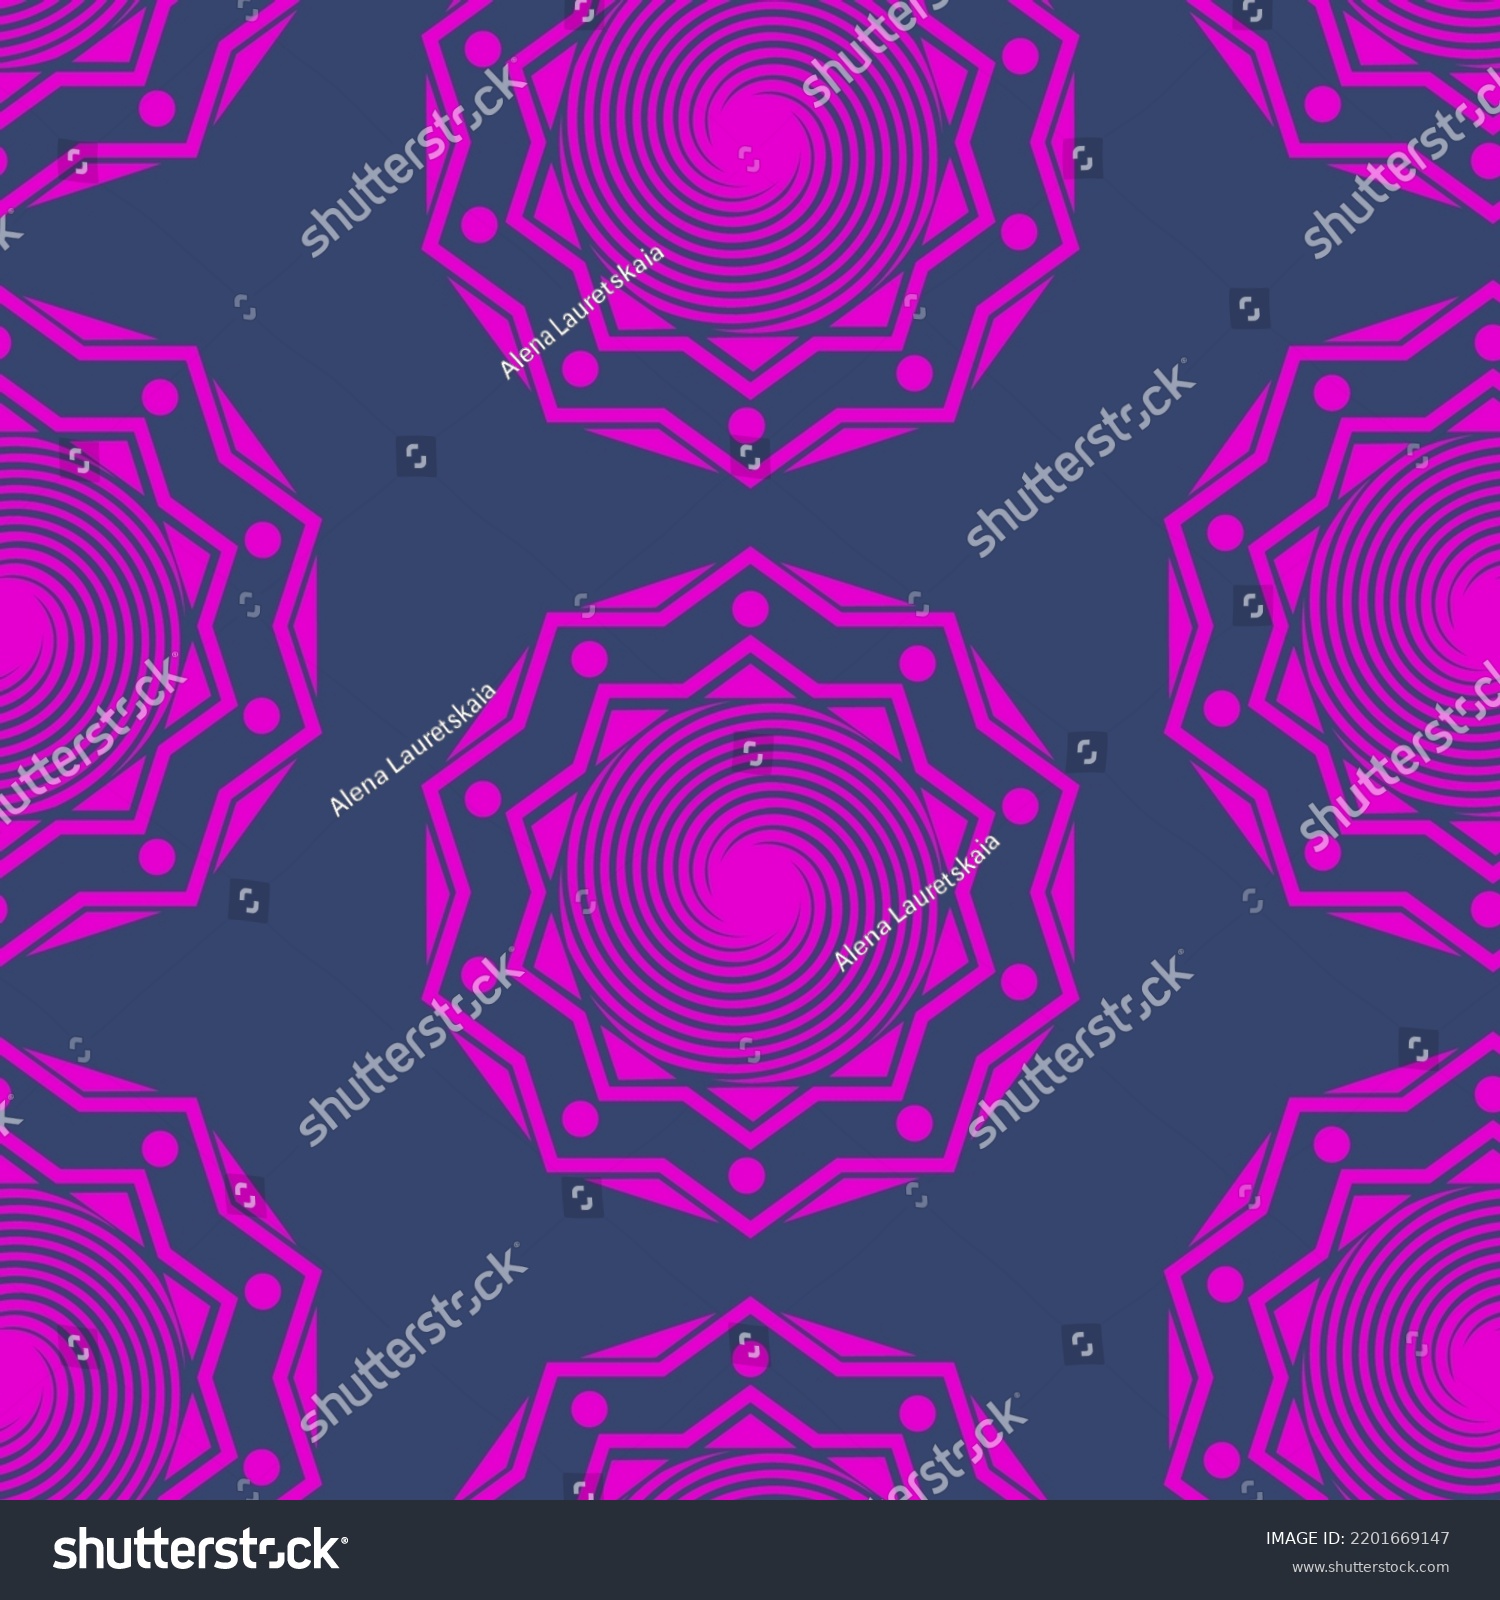 Vector Perforated Bright Patterns Papel Picado Stock Vector Royalty Free 2201669147 Shutterstock 0988